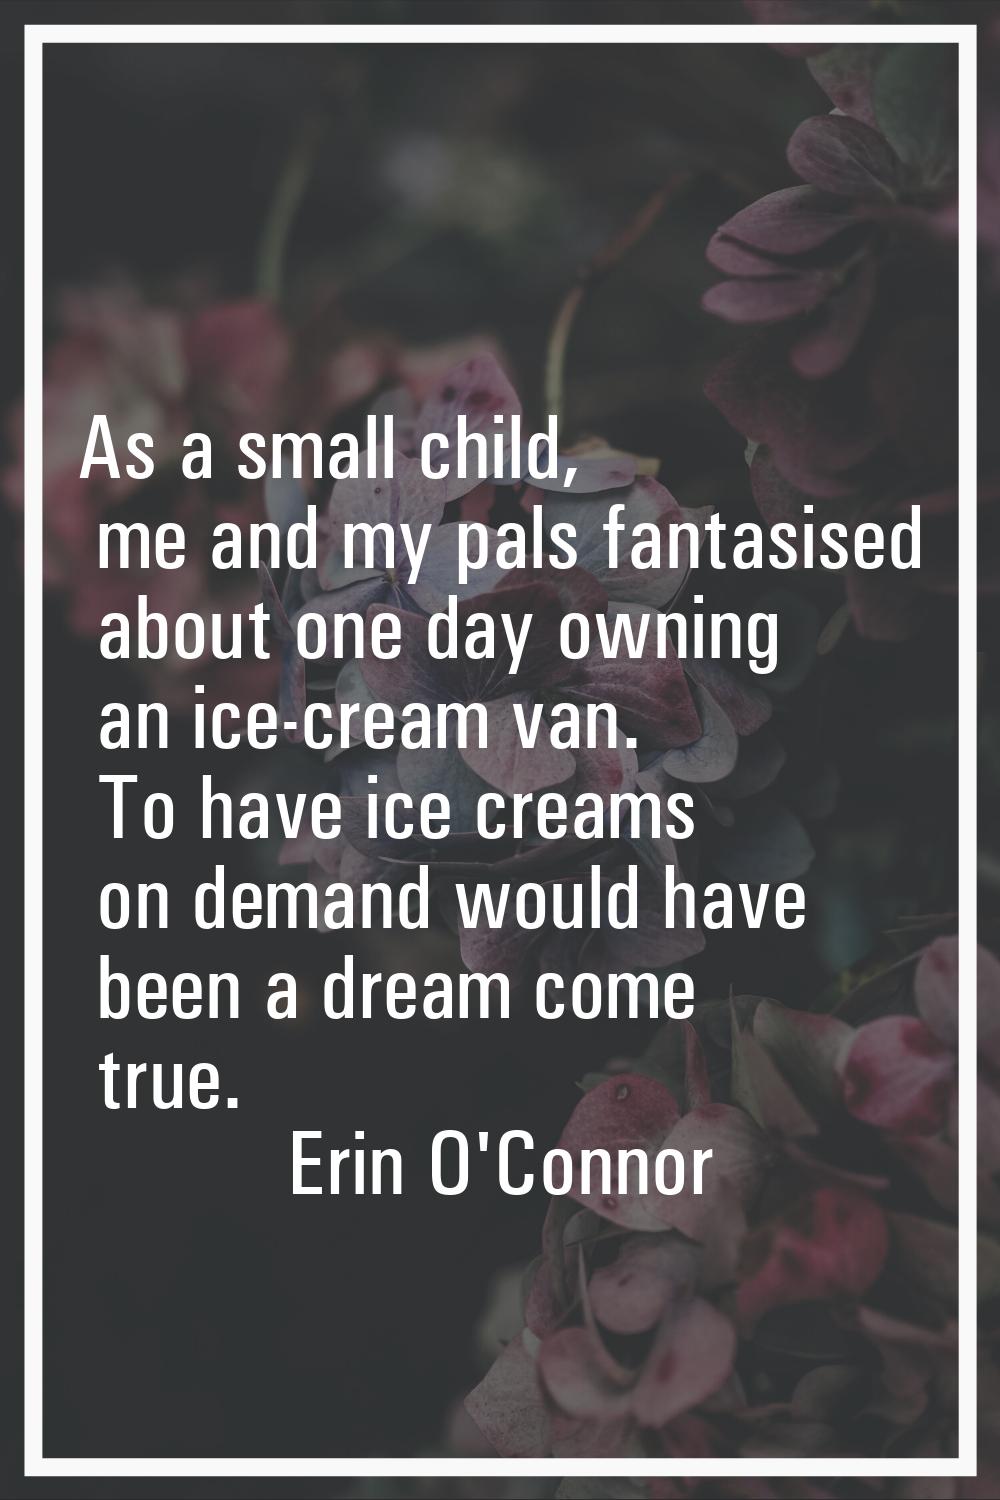 As a small child, me and my pals fantasised about one day owning an ice-cream van. To have ice crea